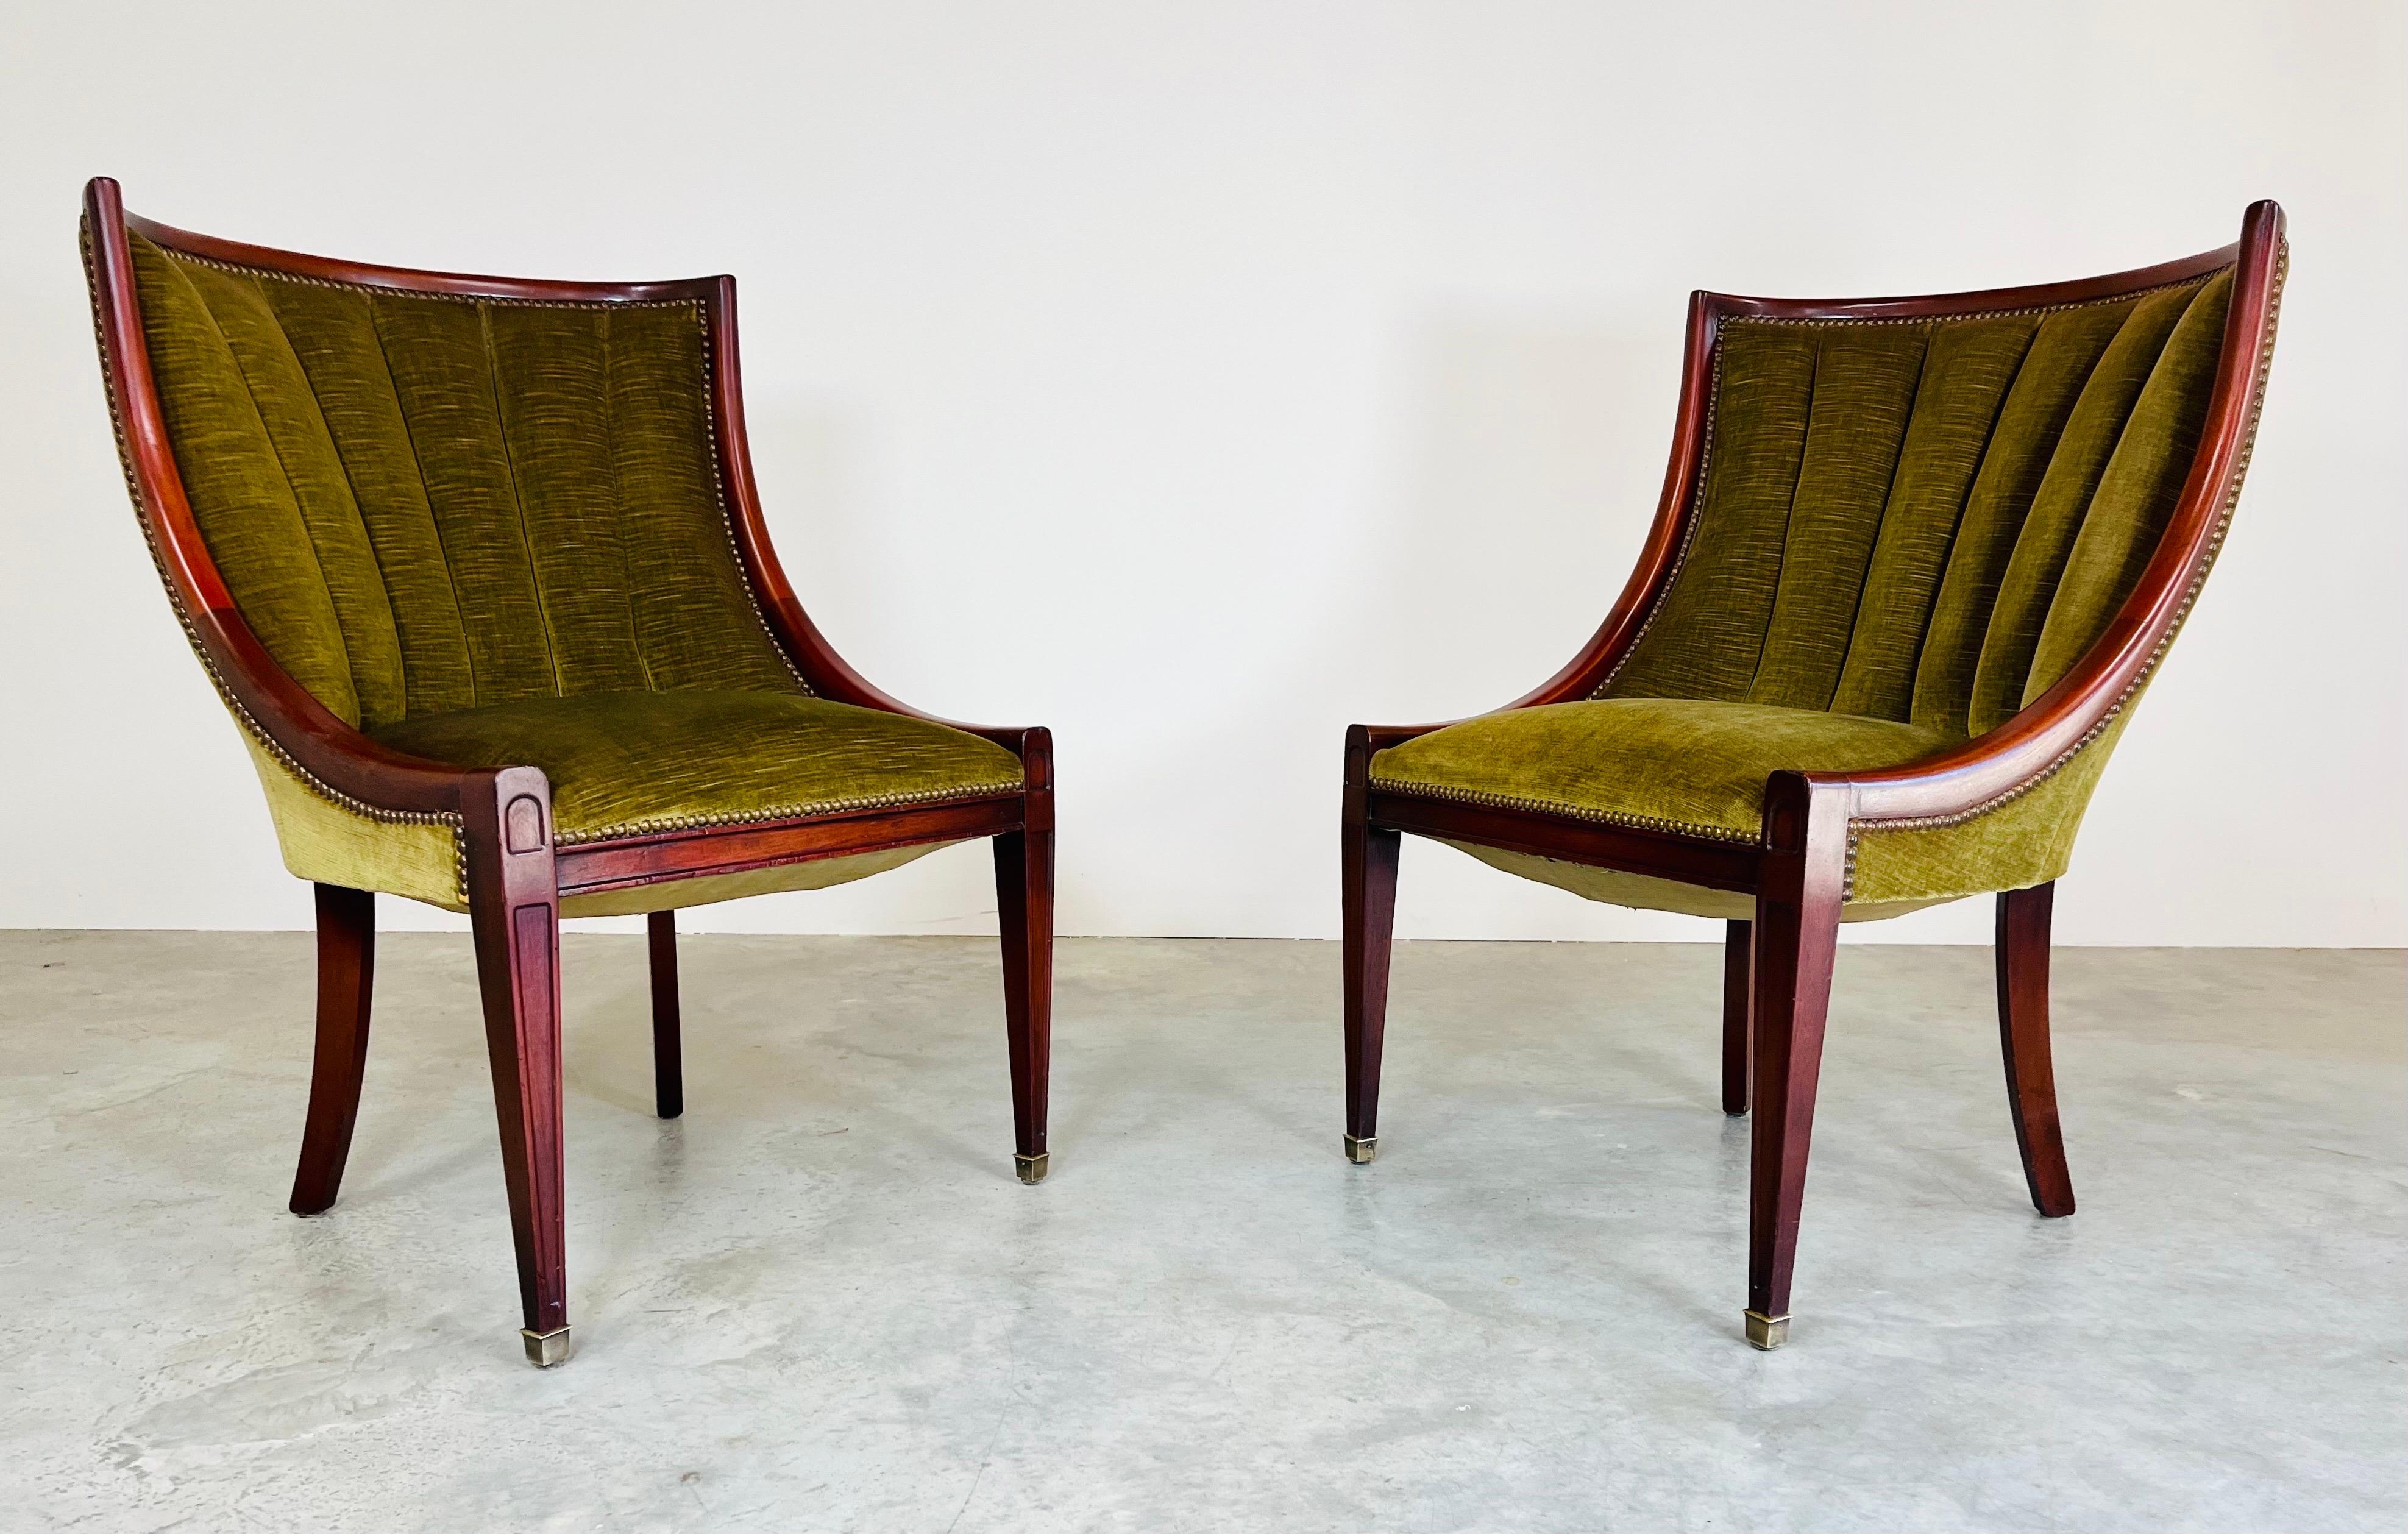 A pair of mahogany swag arm channel back velvet slipper chairs with Klismos or saber back legs and brass sabots on the front attributed to Sally Sirkin Lewis. Absolutely stunning and in very good vintage condition. The mahogany has been carefully